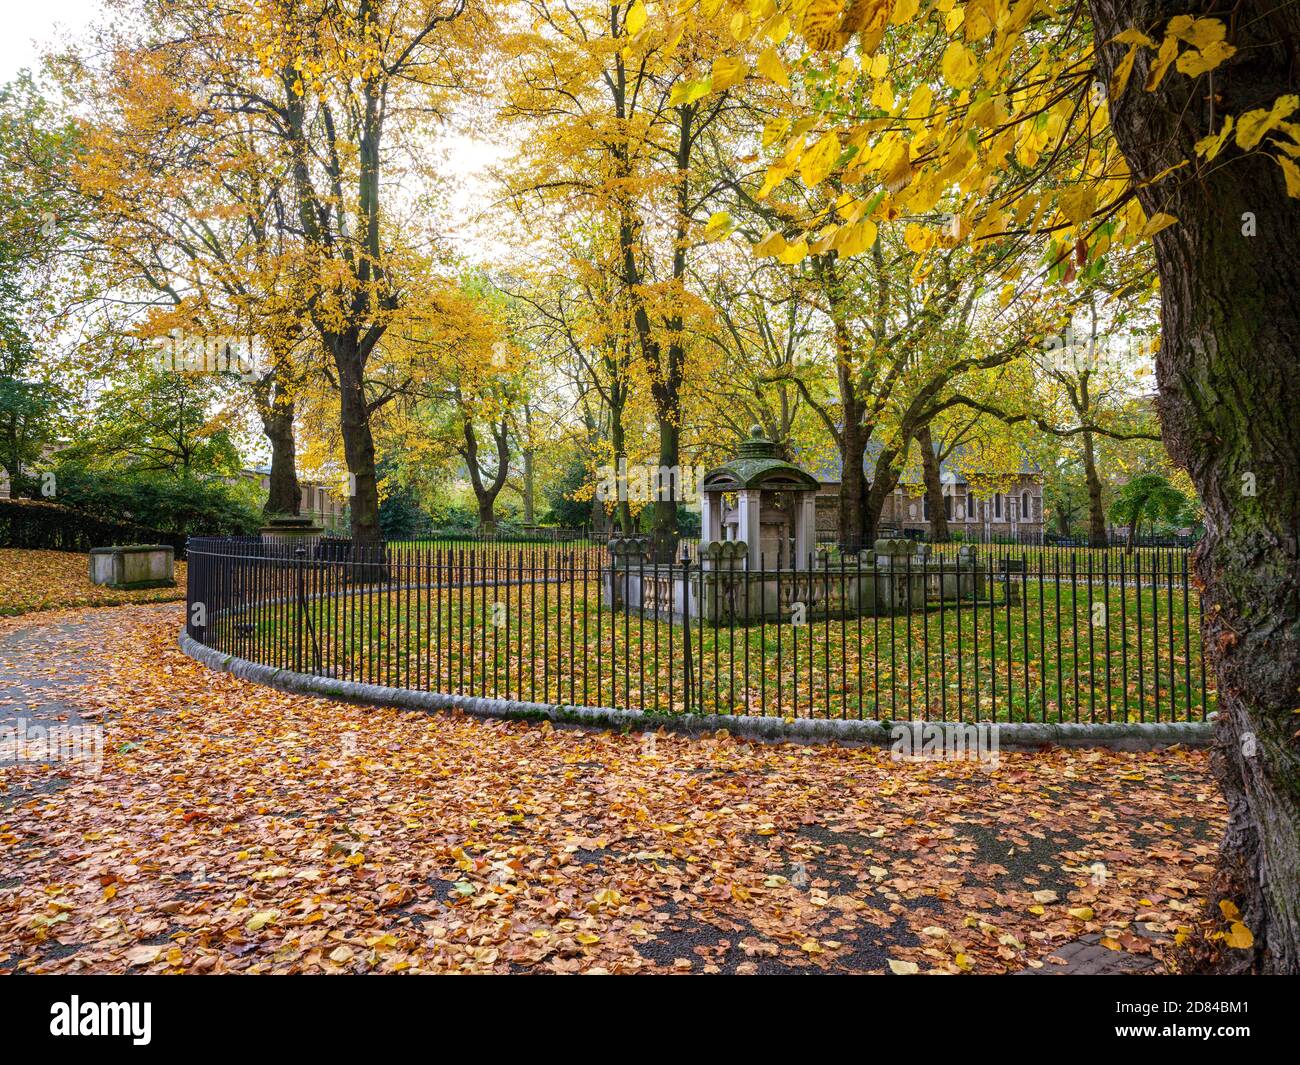 London in Autumn: enjoy the beauty of autumn colours, exercise and fresh air at St Pancras Old Church graveyard Stock Photo